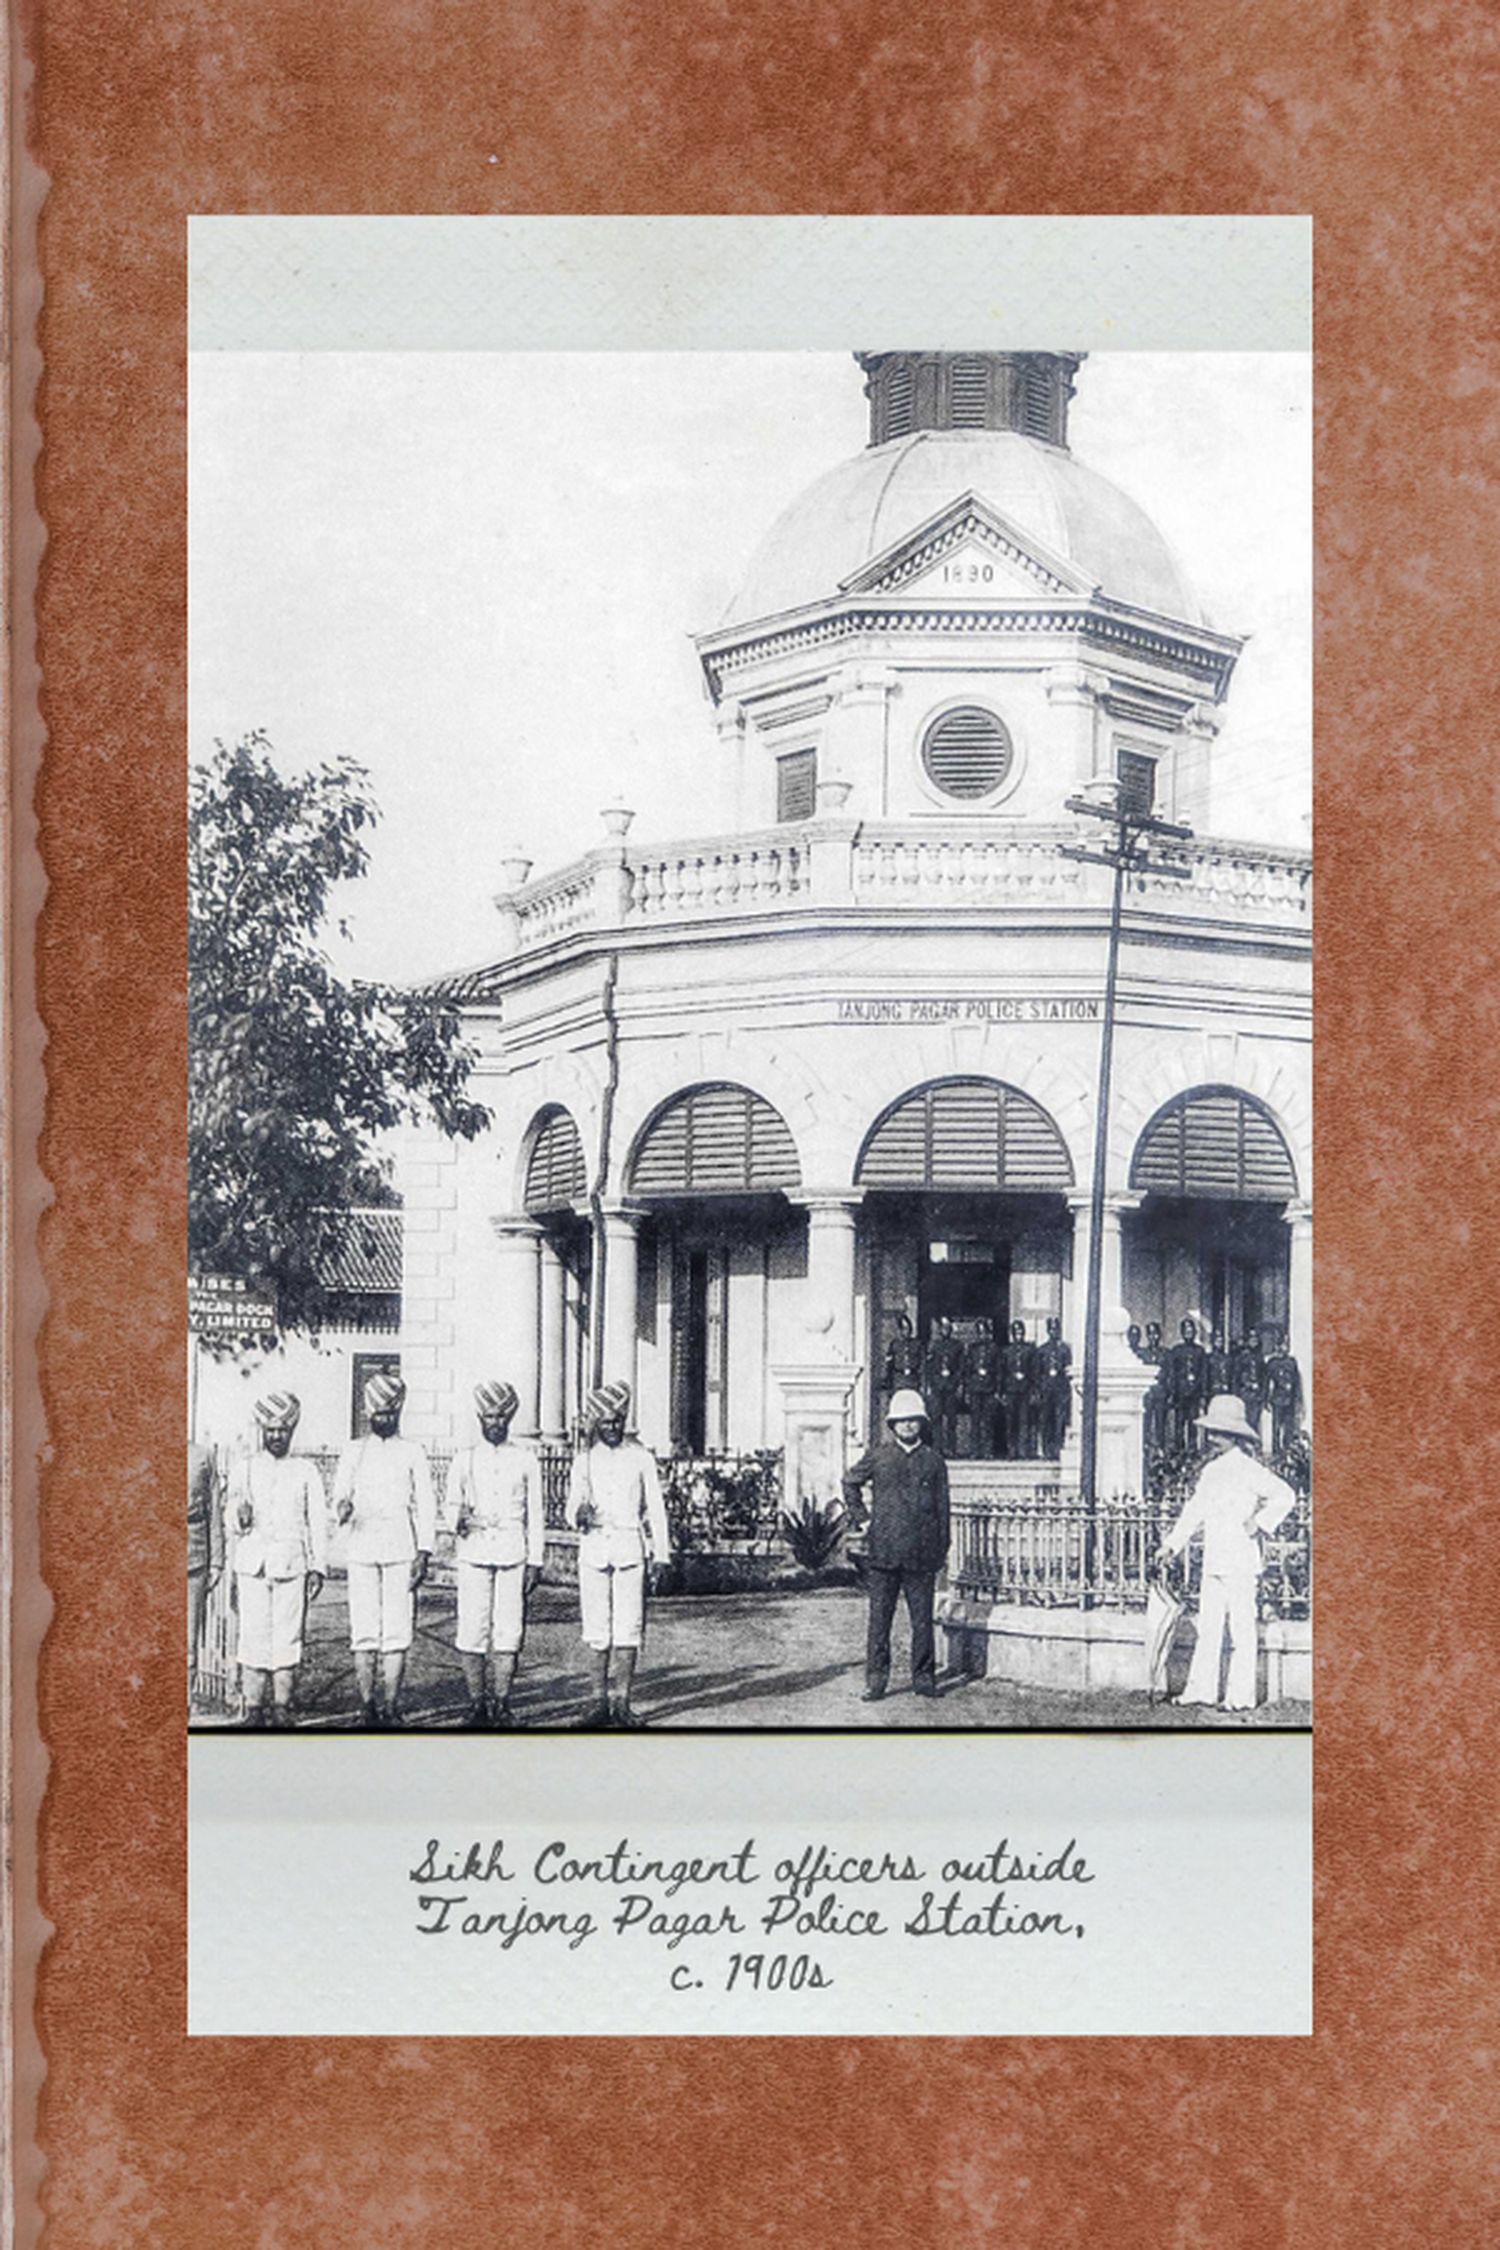 photo of the old tanjong pagar police station, which is a white colonial type building. Sikh officers are standing at the steps of the single storey building